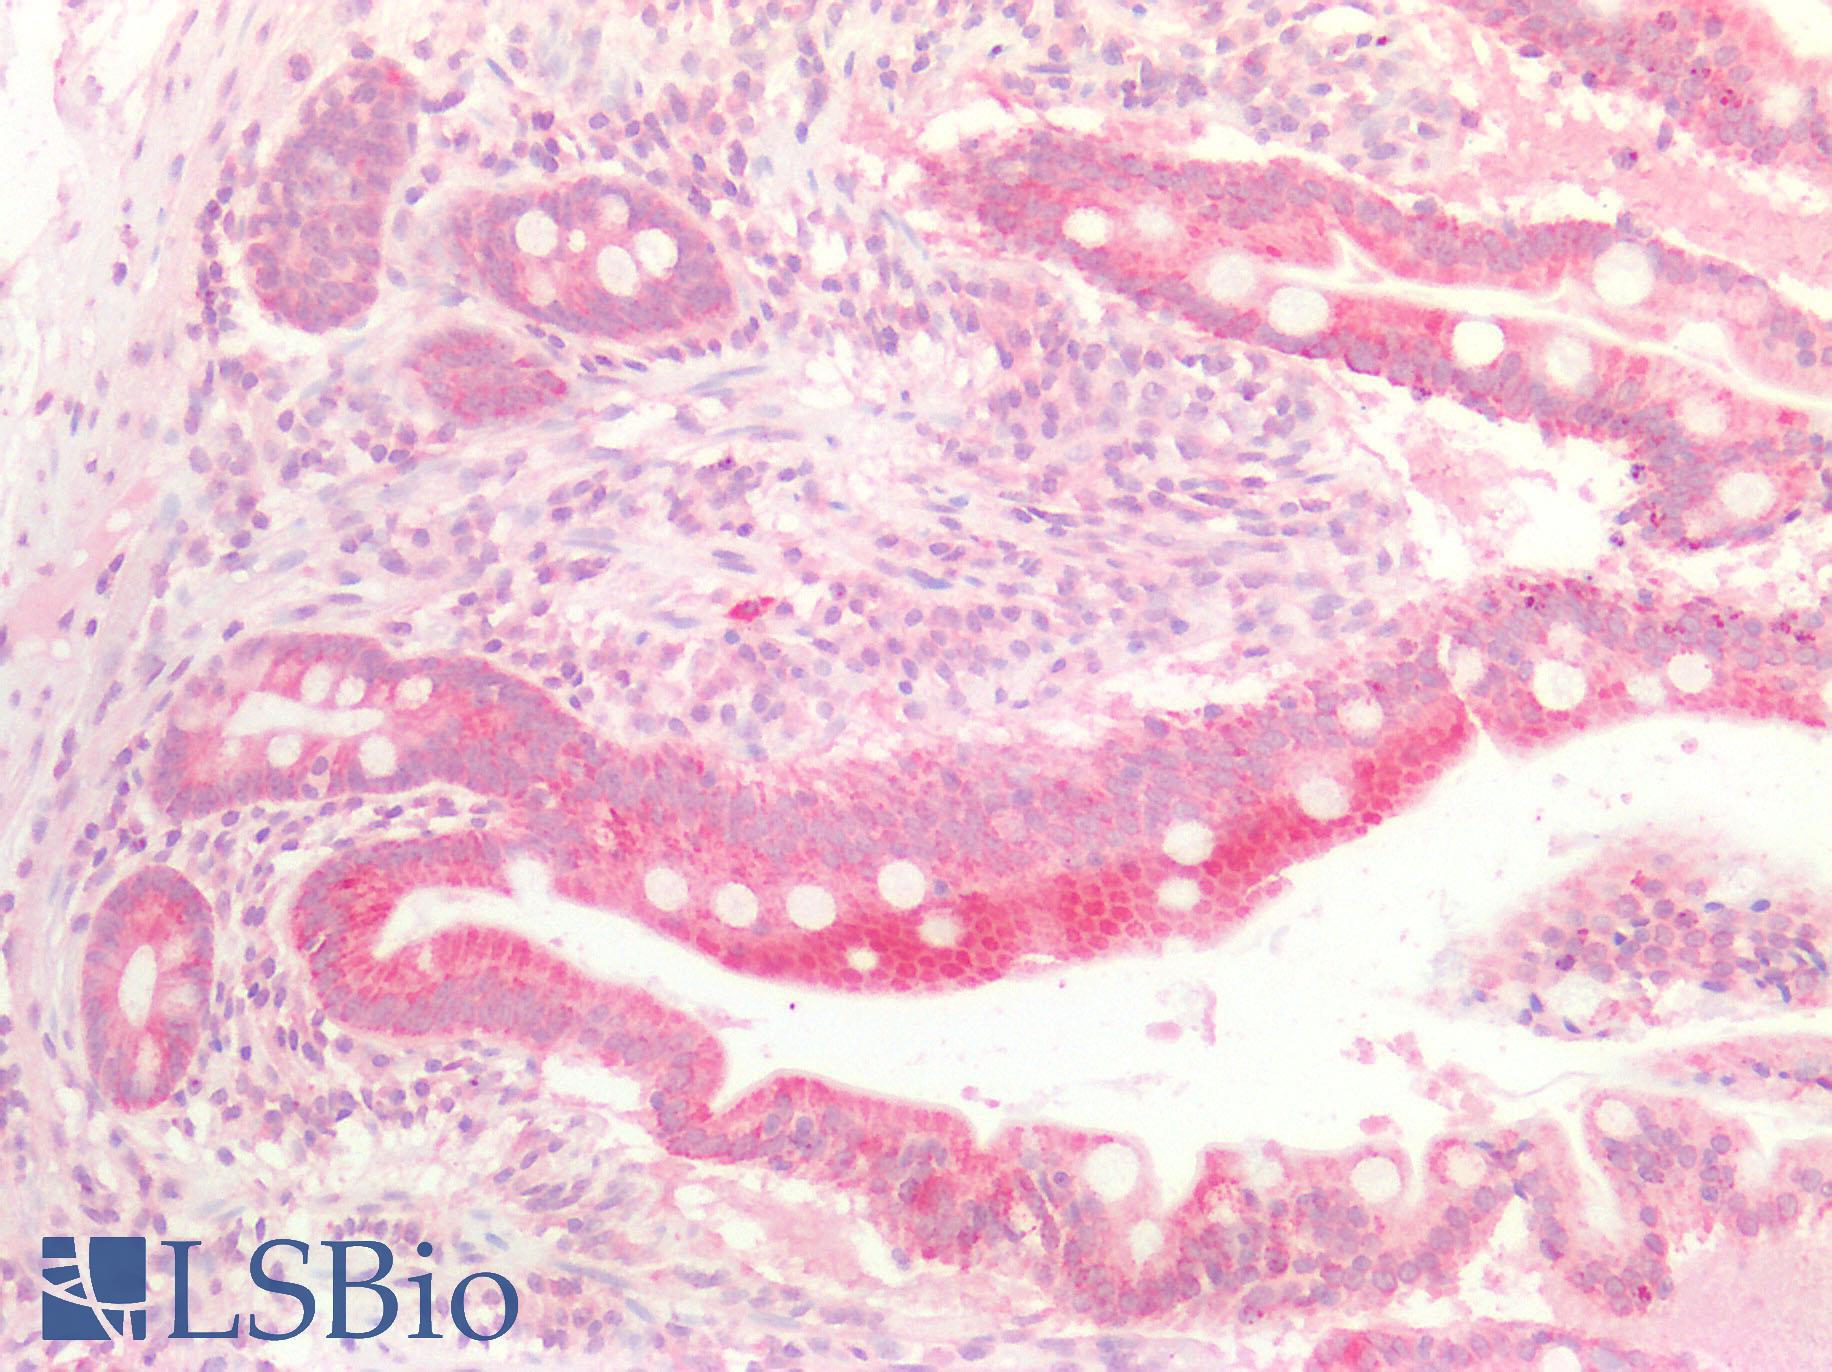 p16INK4a / CDKN2A Antibody - Anti-p16INK4A antibody IHC of human small intestine. Positive staining observed within the absorptive epithelium bordering the villi. Less staining observed within the lamina propria.   Immunohistochemistry of formalin-fixed, paraffin-embedded tissue after heat-induced antigen retrieval.